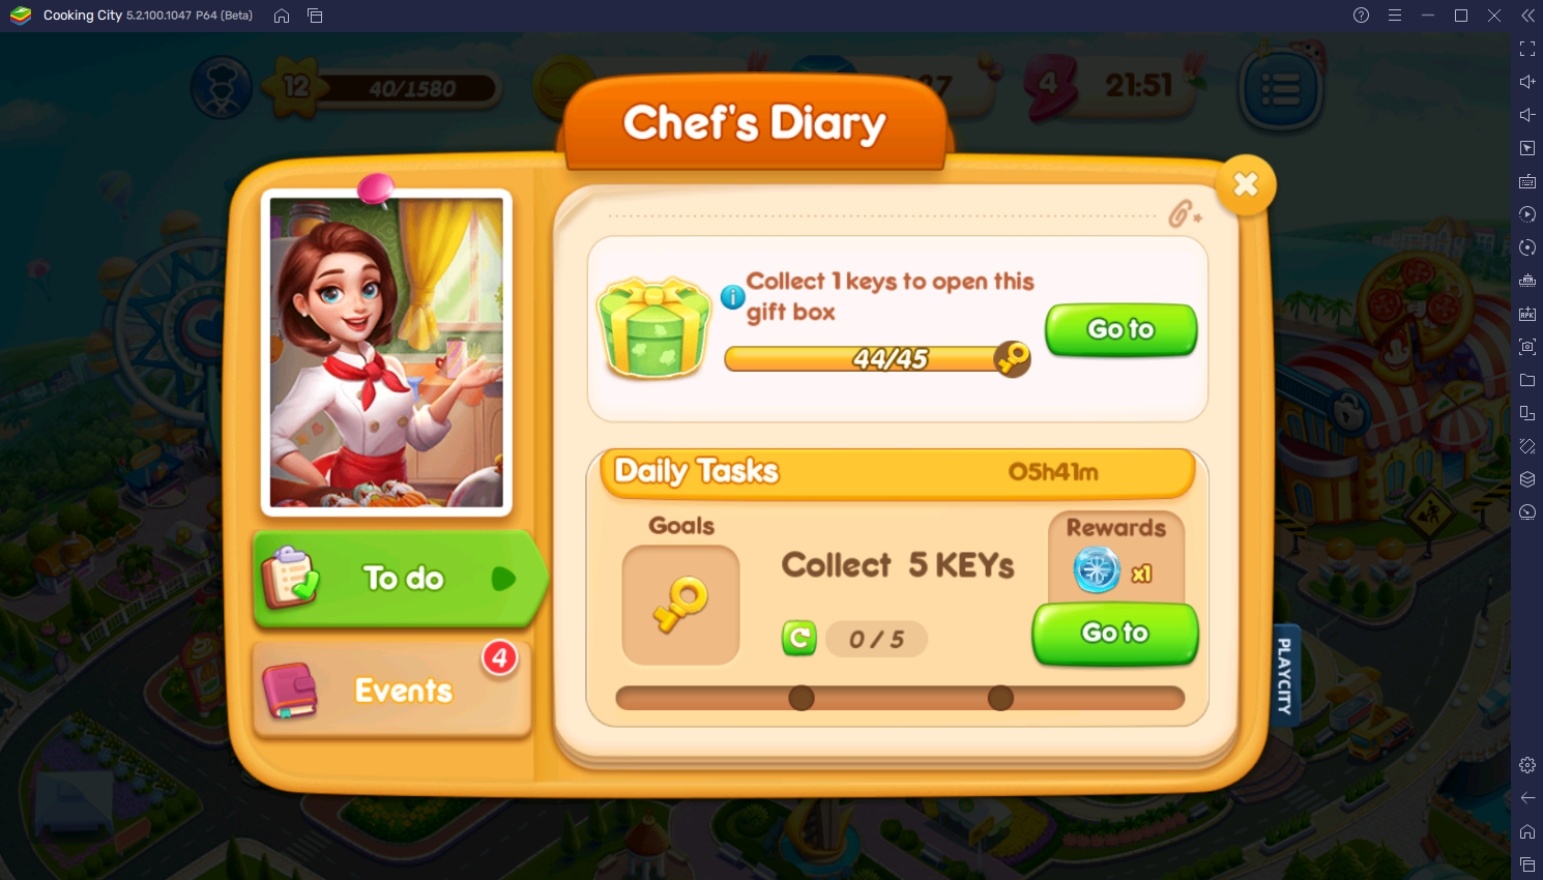 Tips & Tricks to Playing Cooking City: Restaurant Games